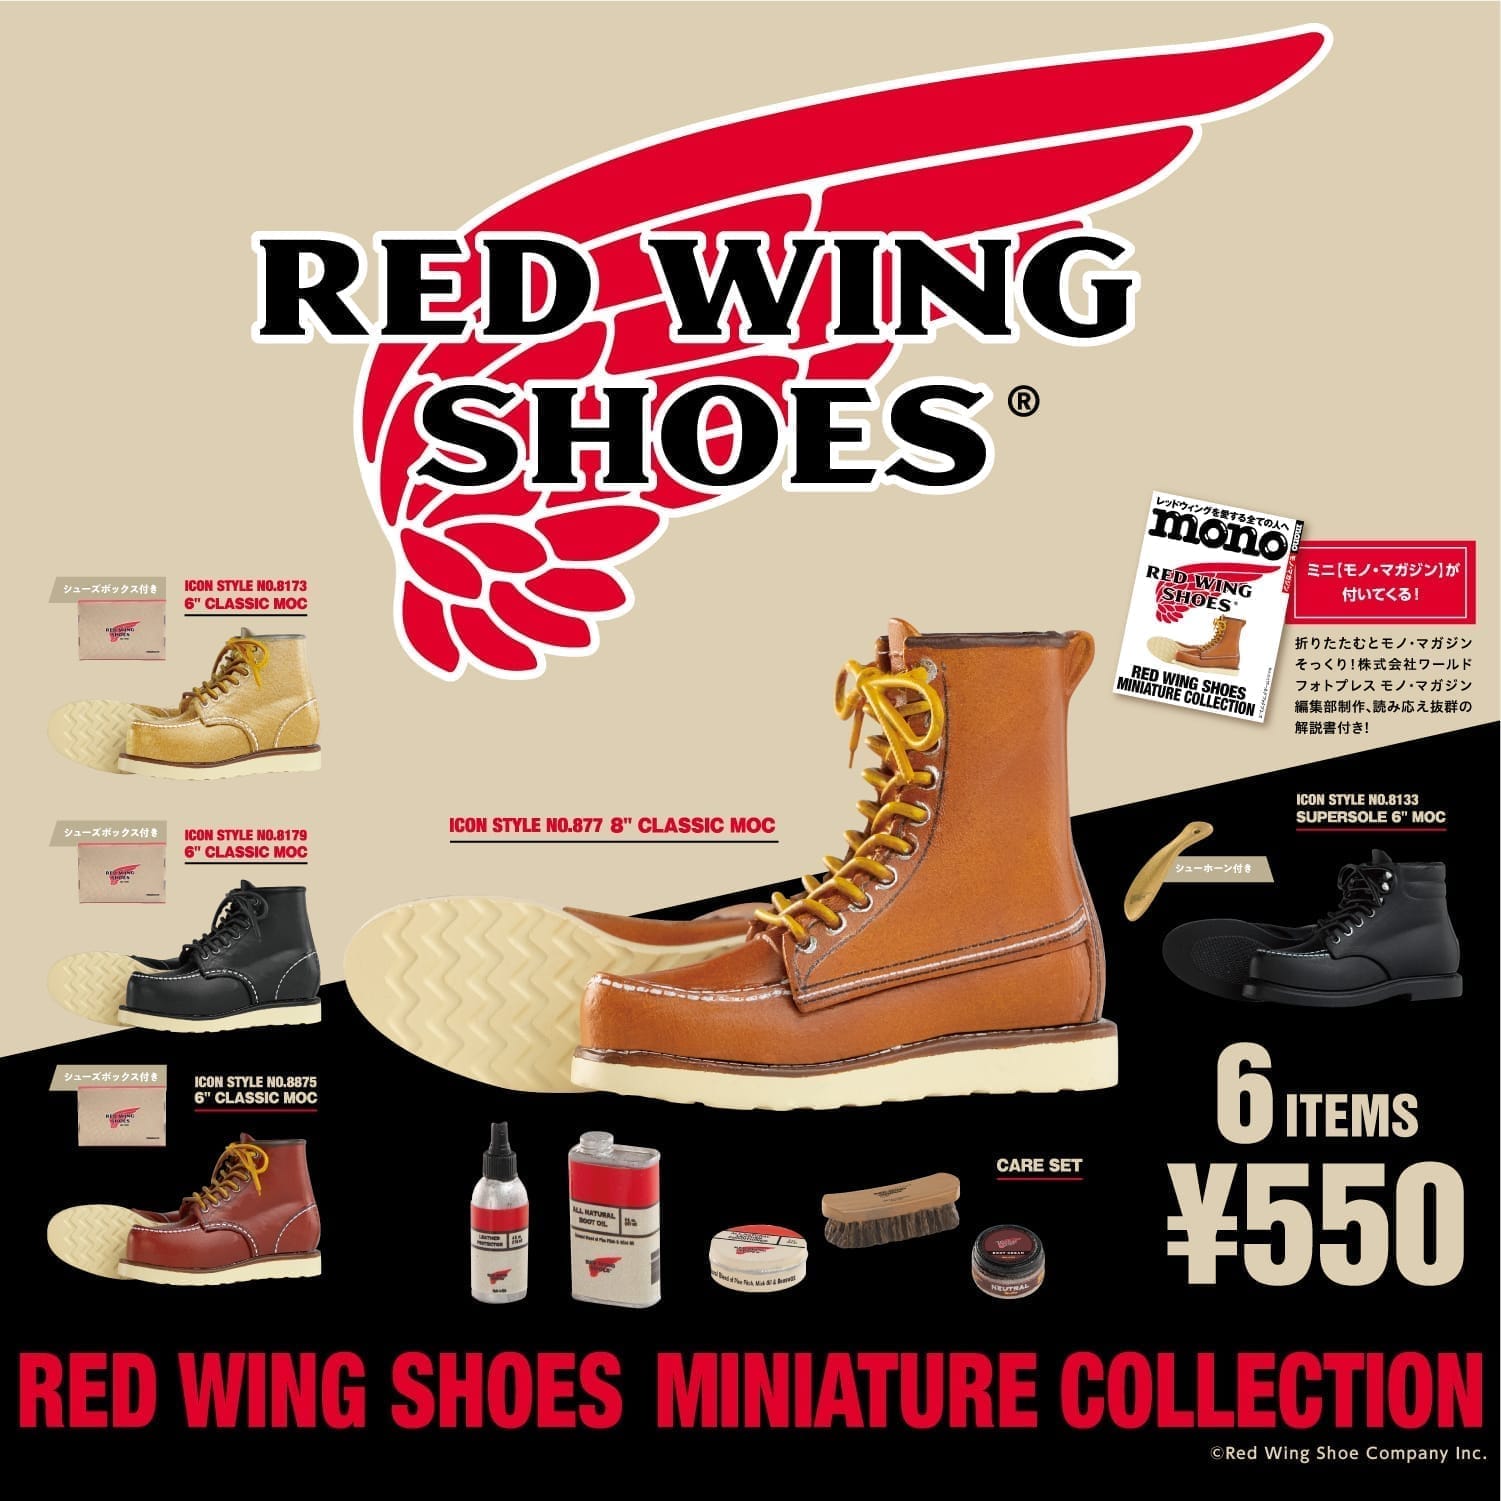 RED WING SHOES MINIATURE COLLECTION 8個パック＋公式EC限定ダイカットステッカー1枚>